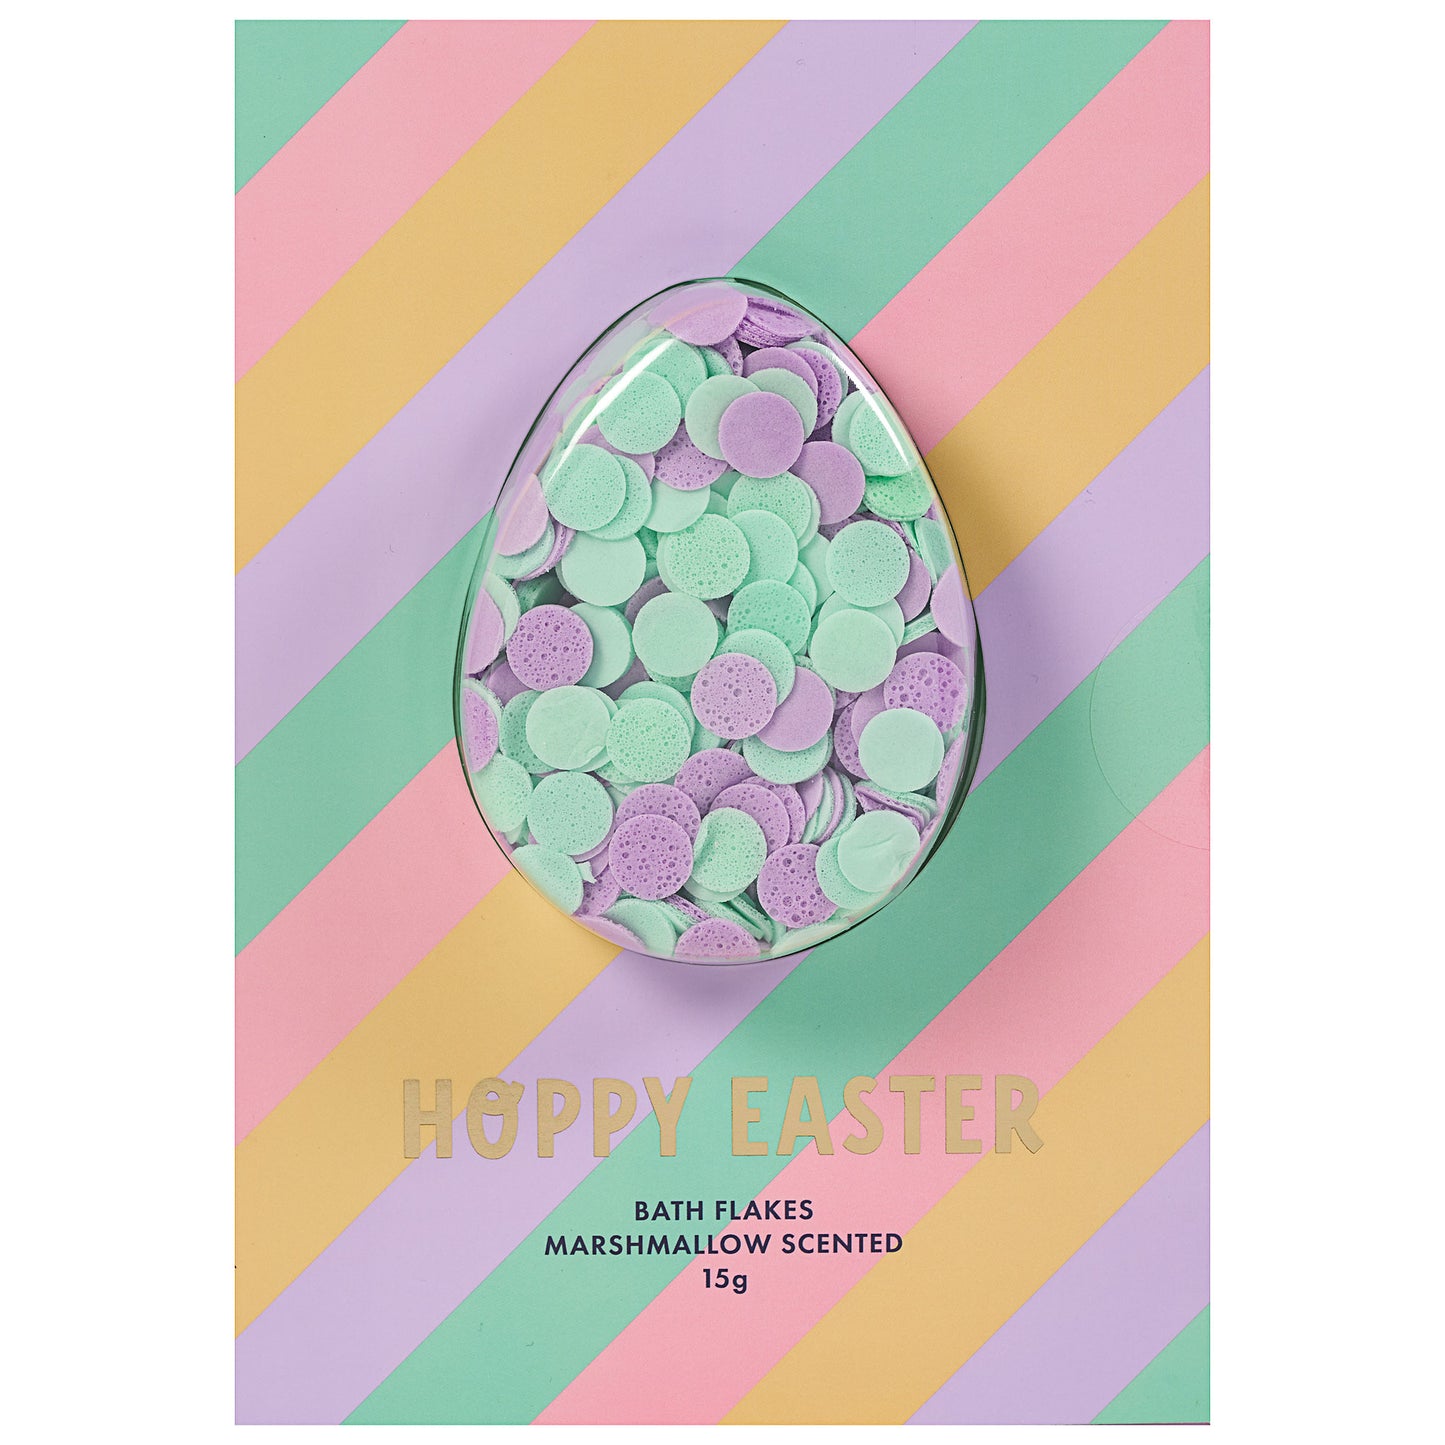 Easter Card with Bath Flakes